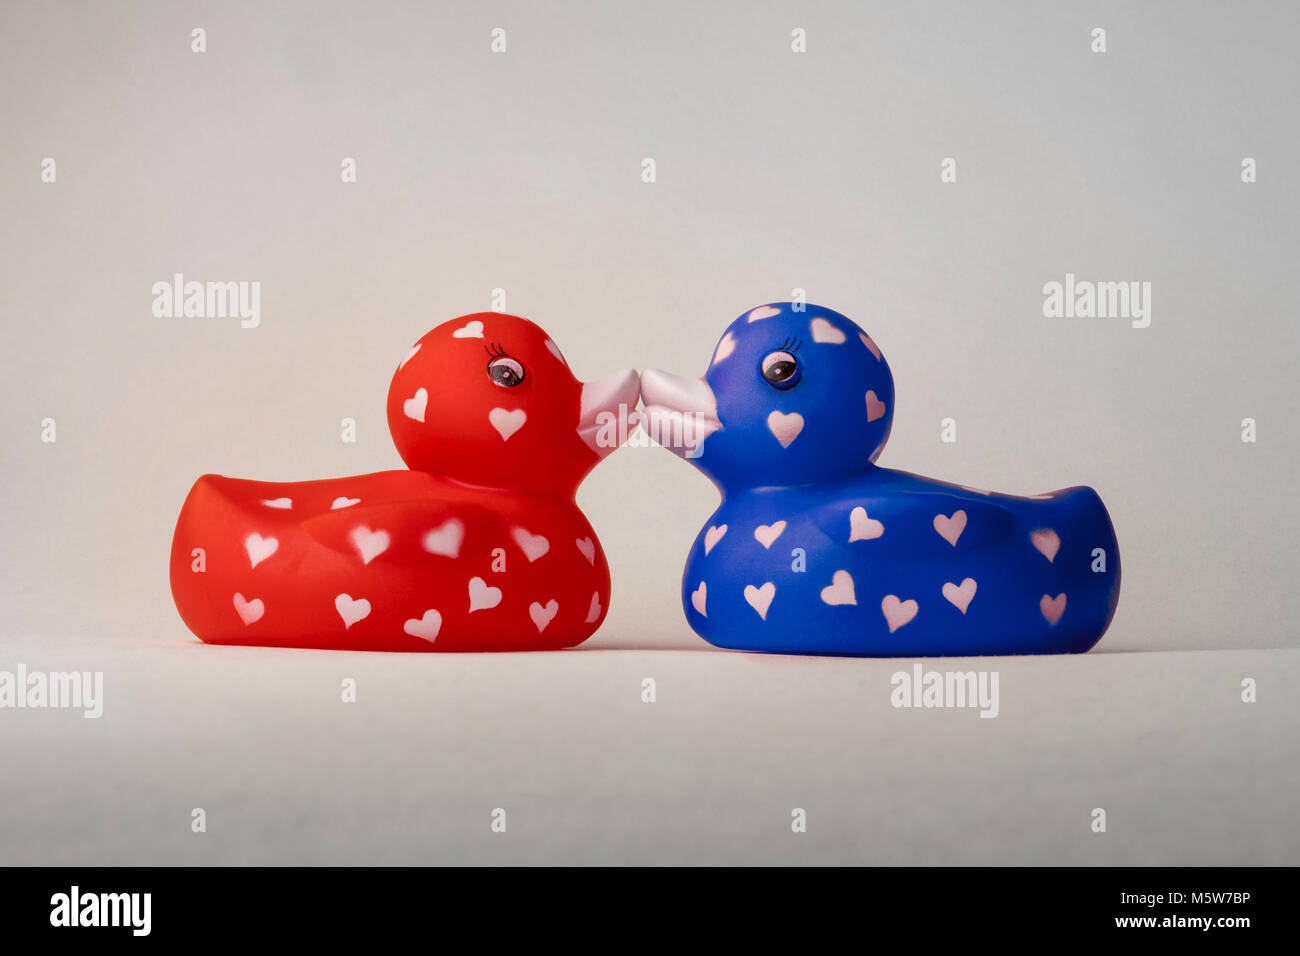 Valentine bath love ducks with hearts on their bodies, kissing on lips Stock Photo